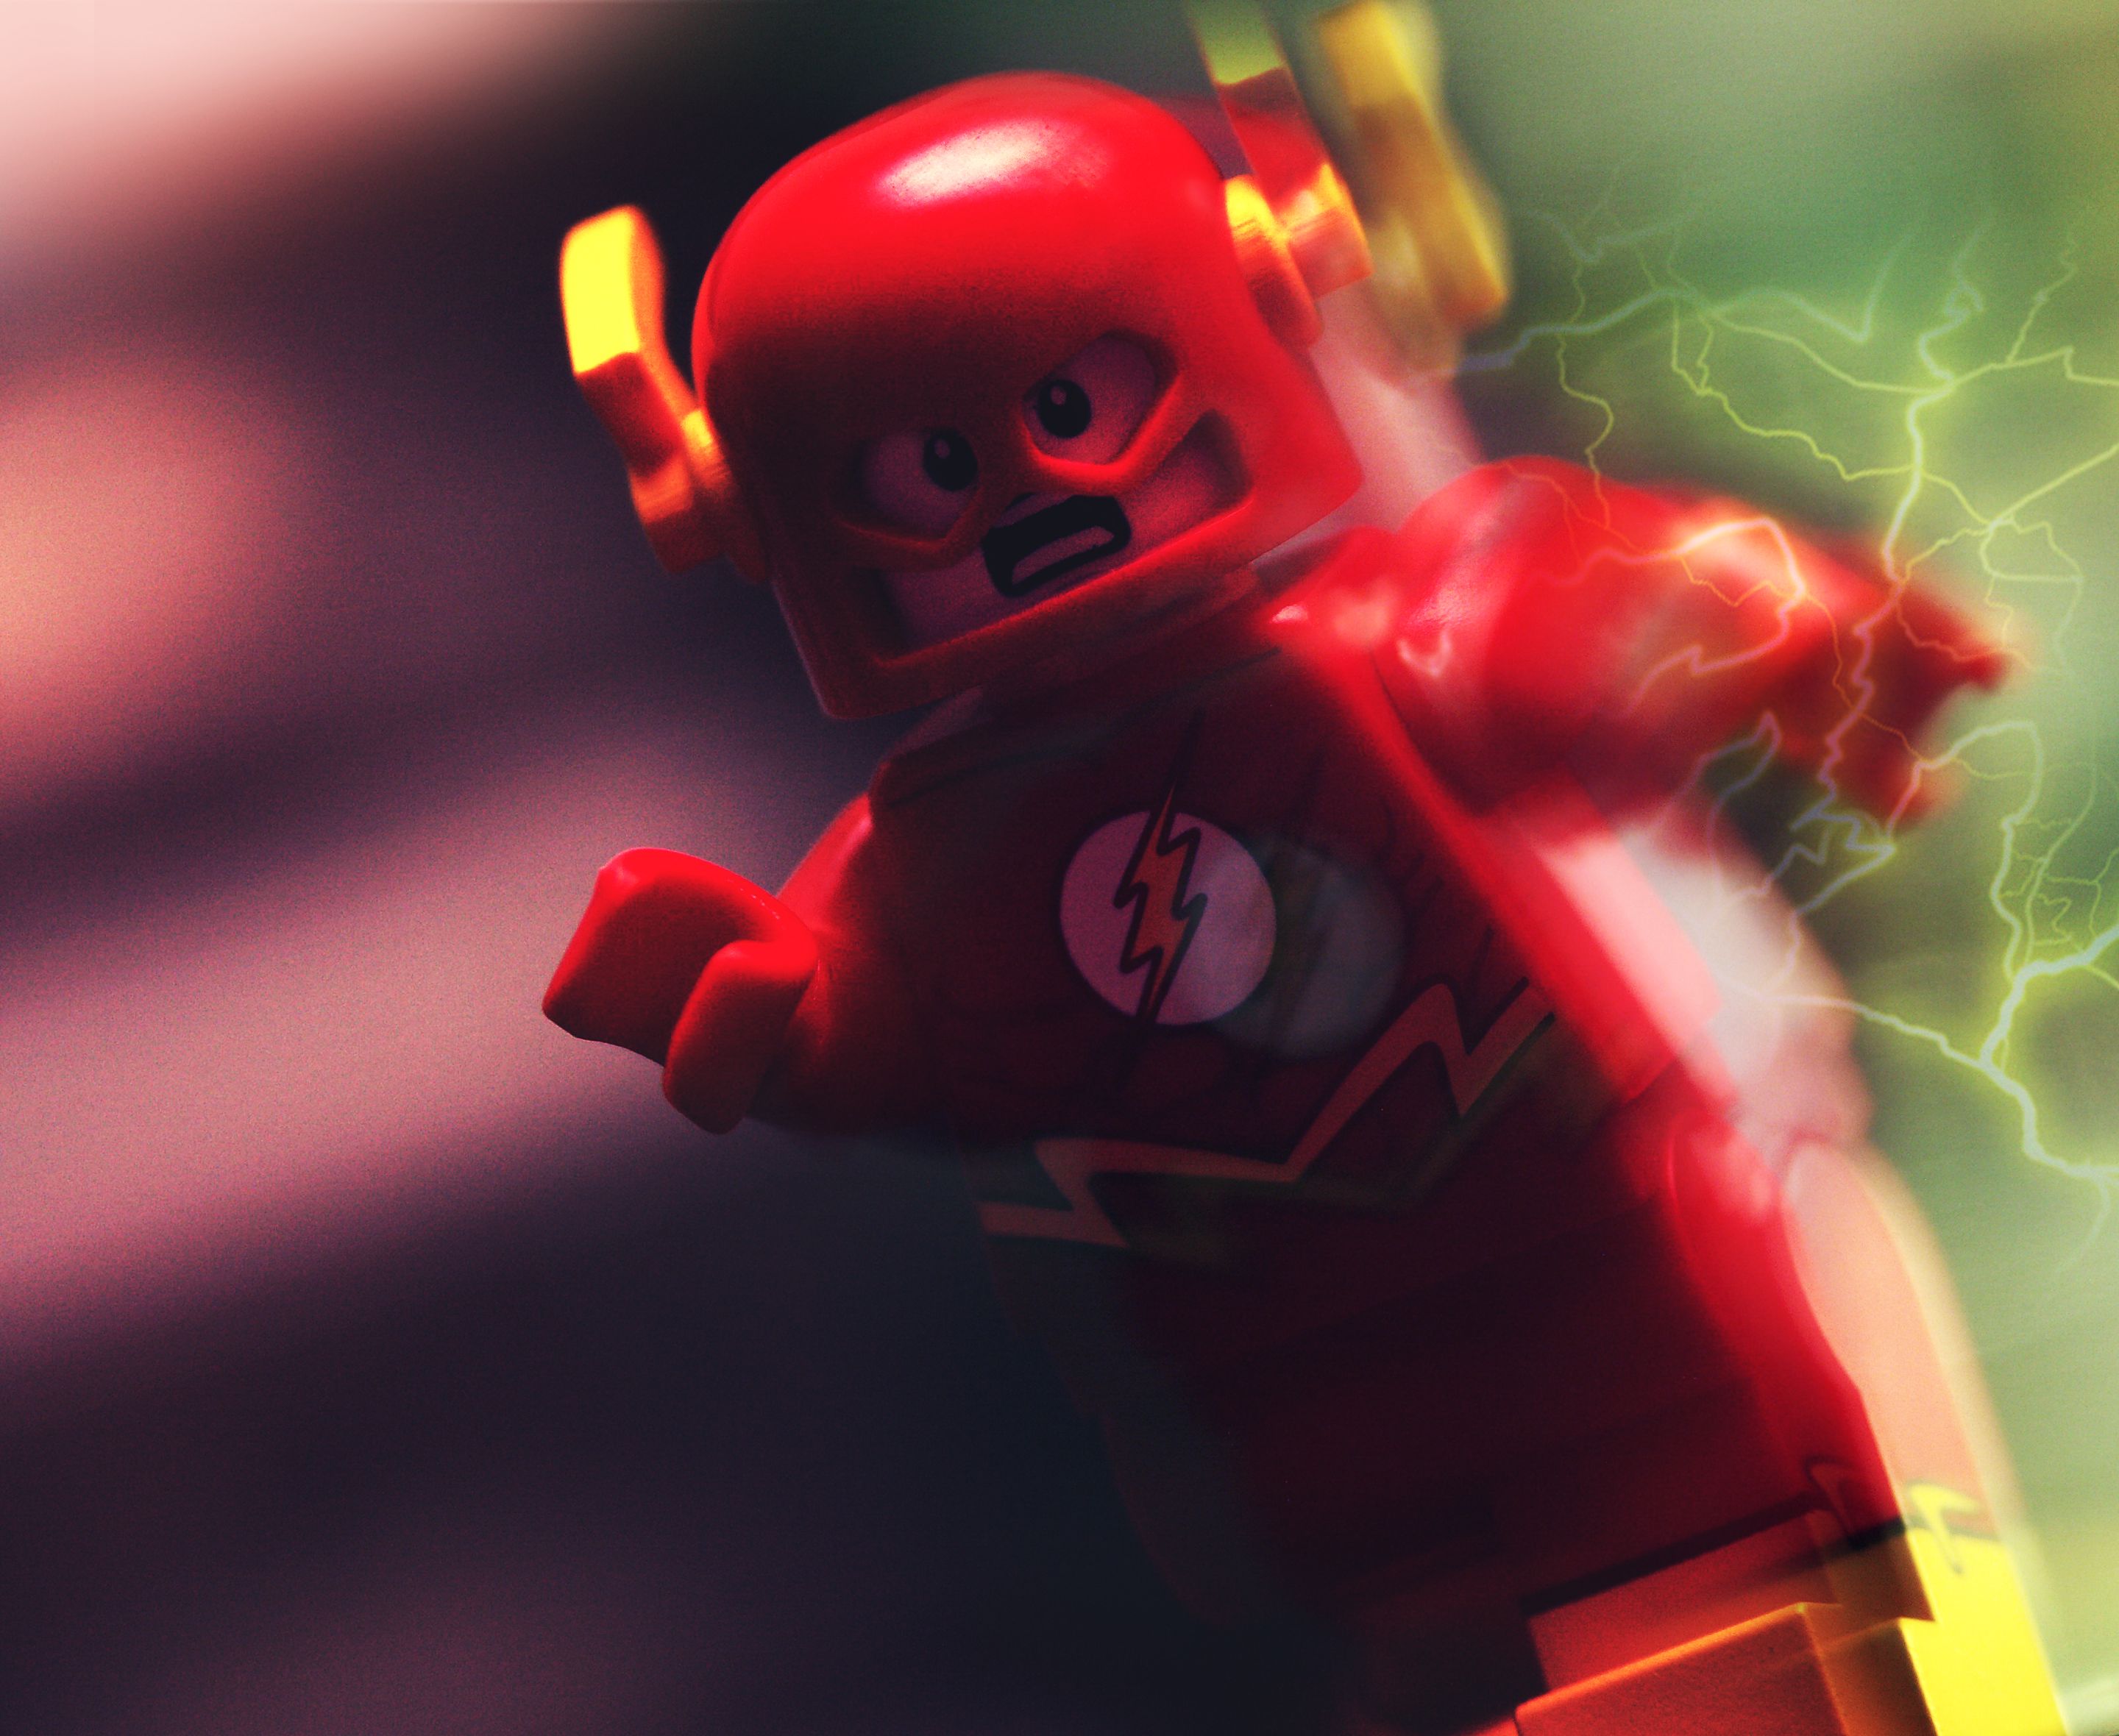 Wallpaper, show, macro, comics, effects, photography, DC, TV, cool, LEGO, special, cw, editing, dccomics, fx, pilot, christo, theflash, spoilers, andrewcookston 2880x2360